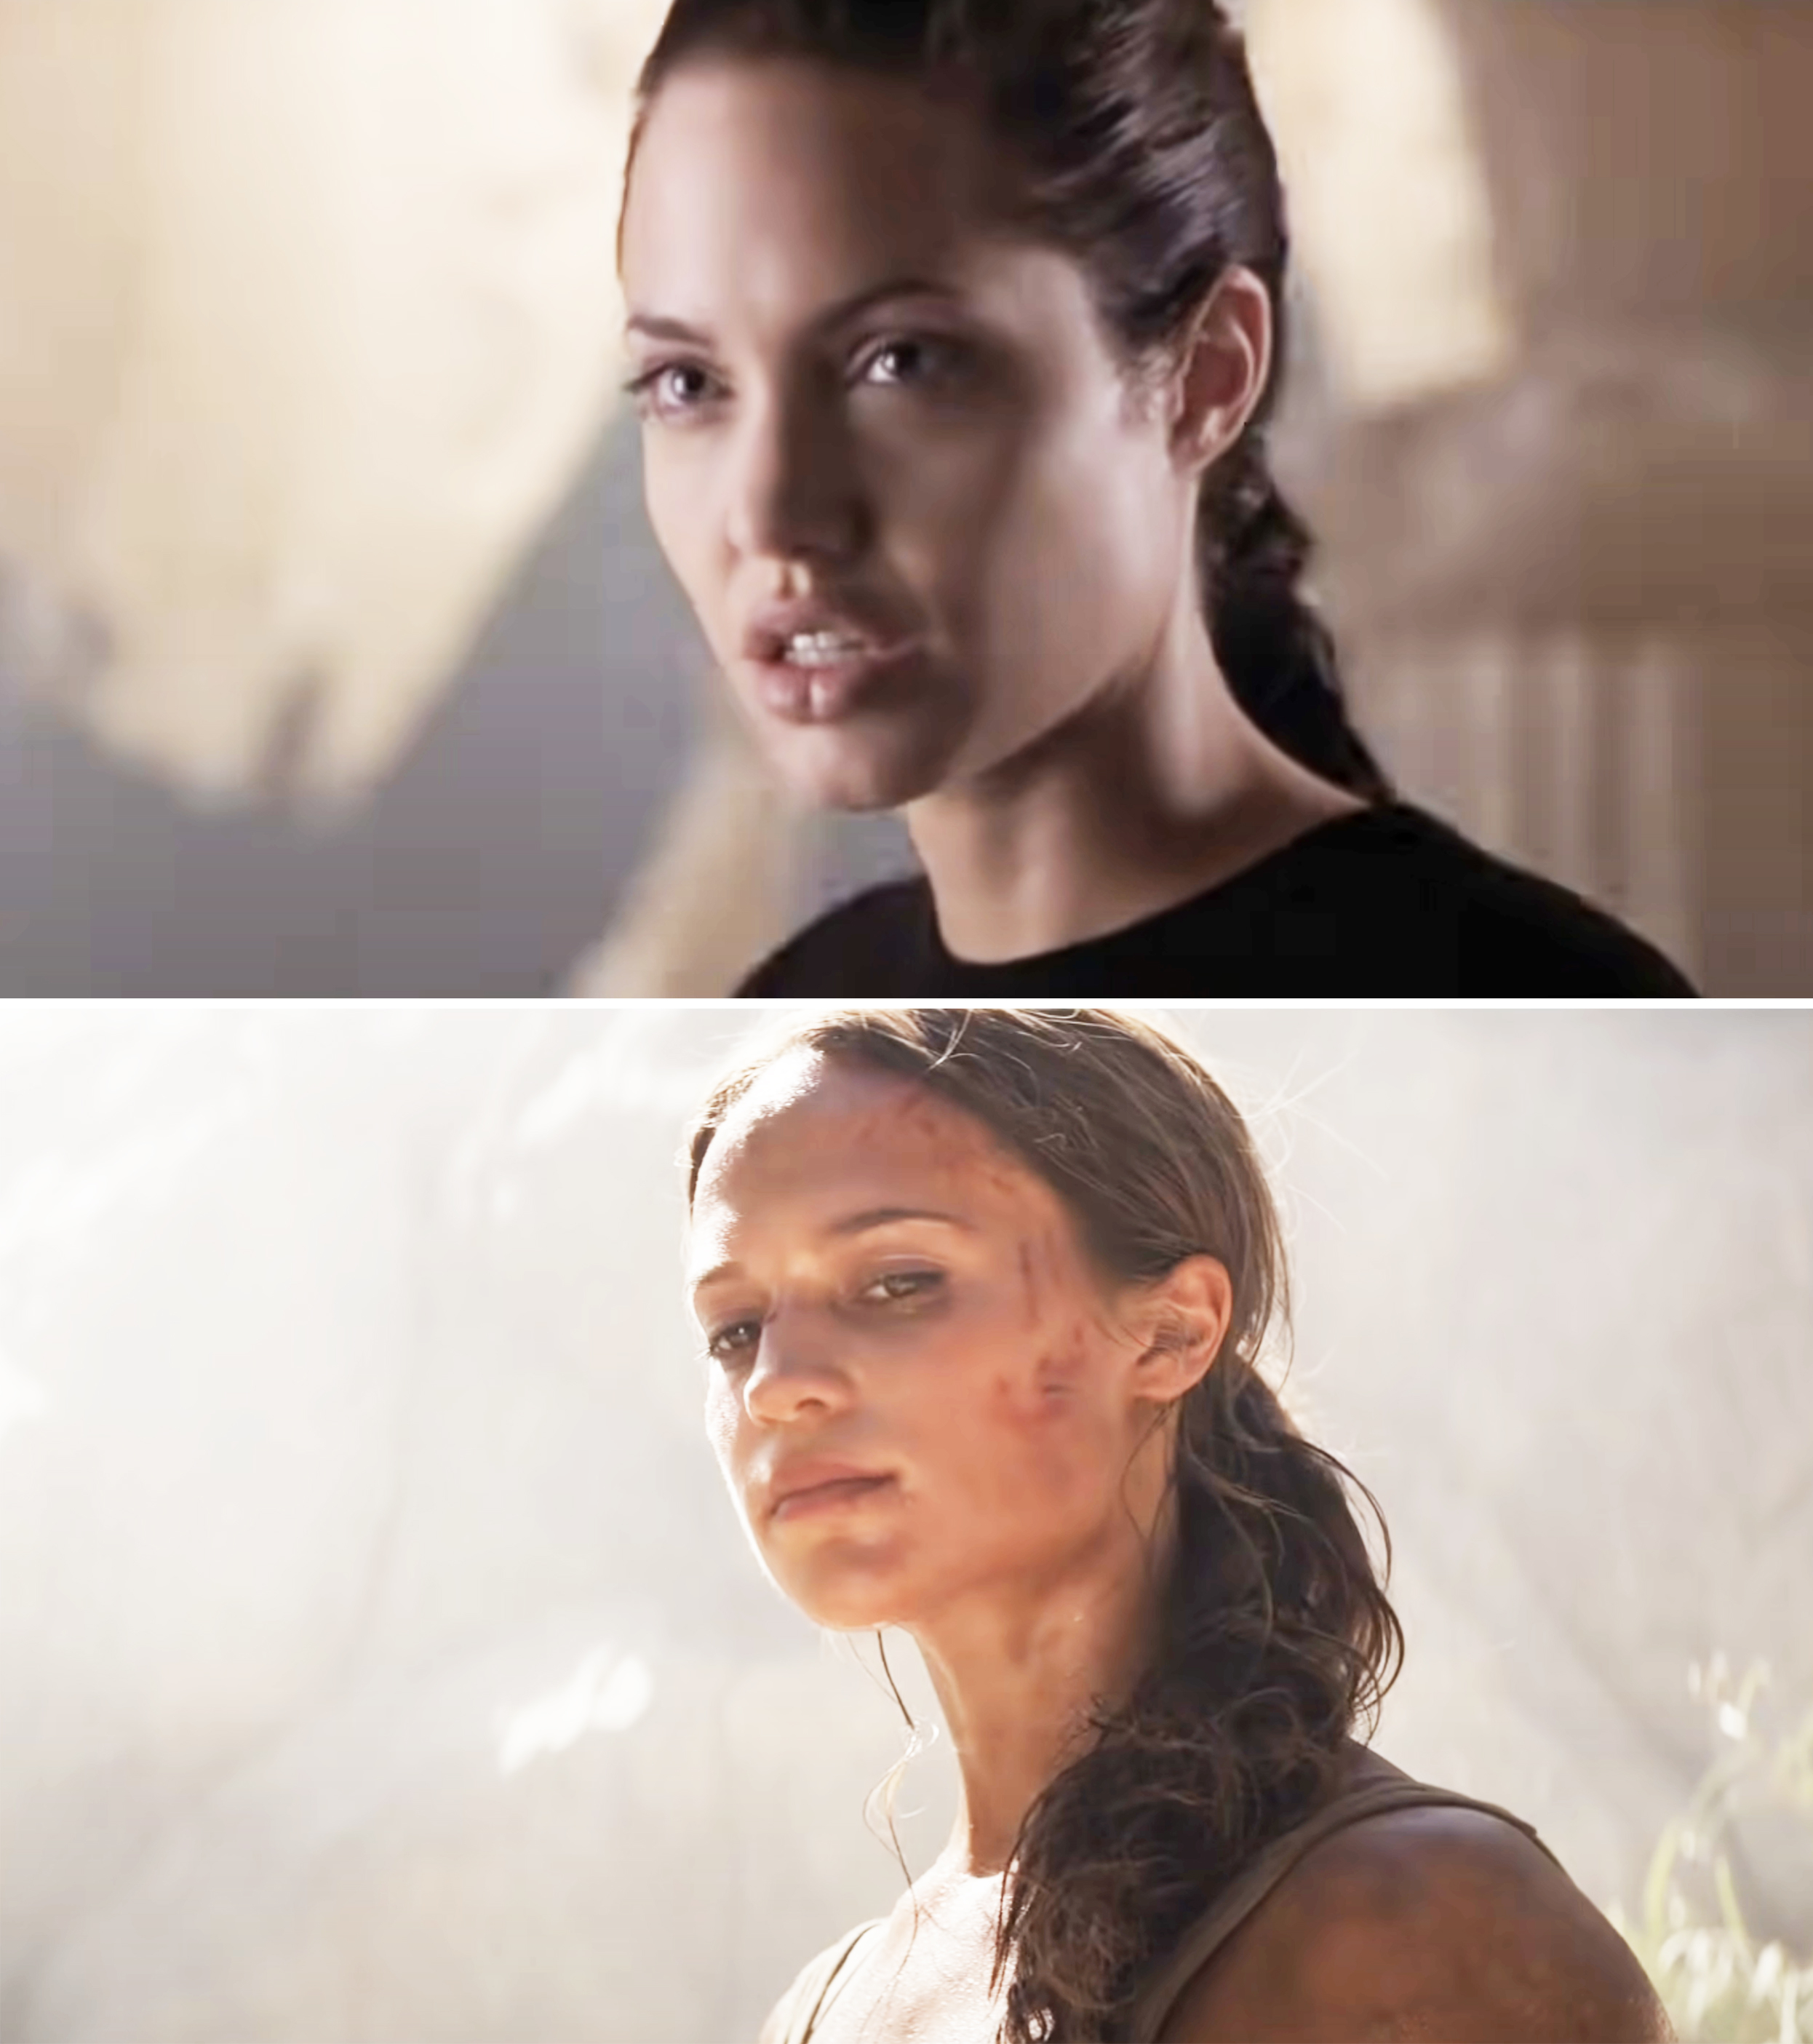 Angelina and Alicia, both looking serious